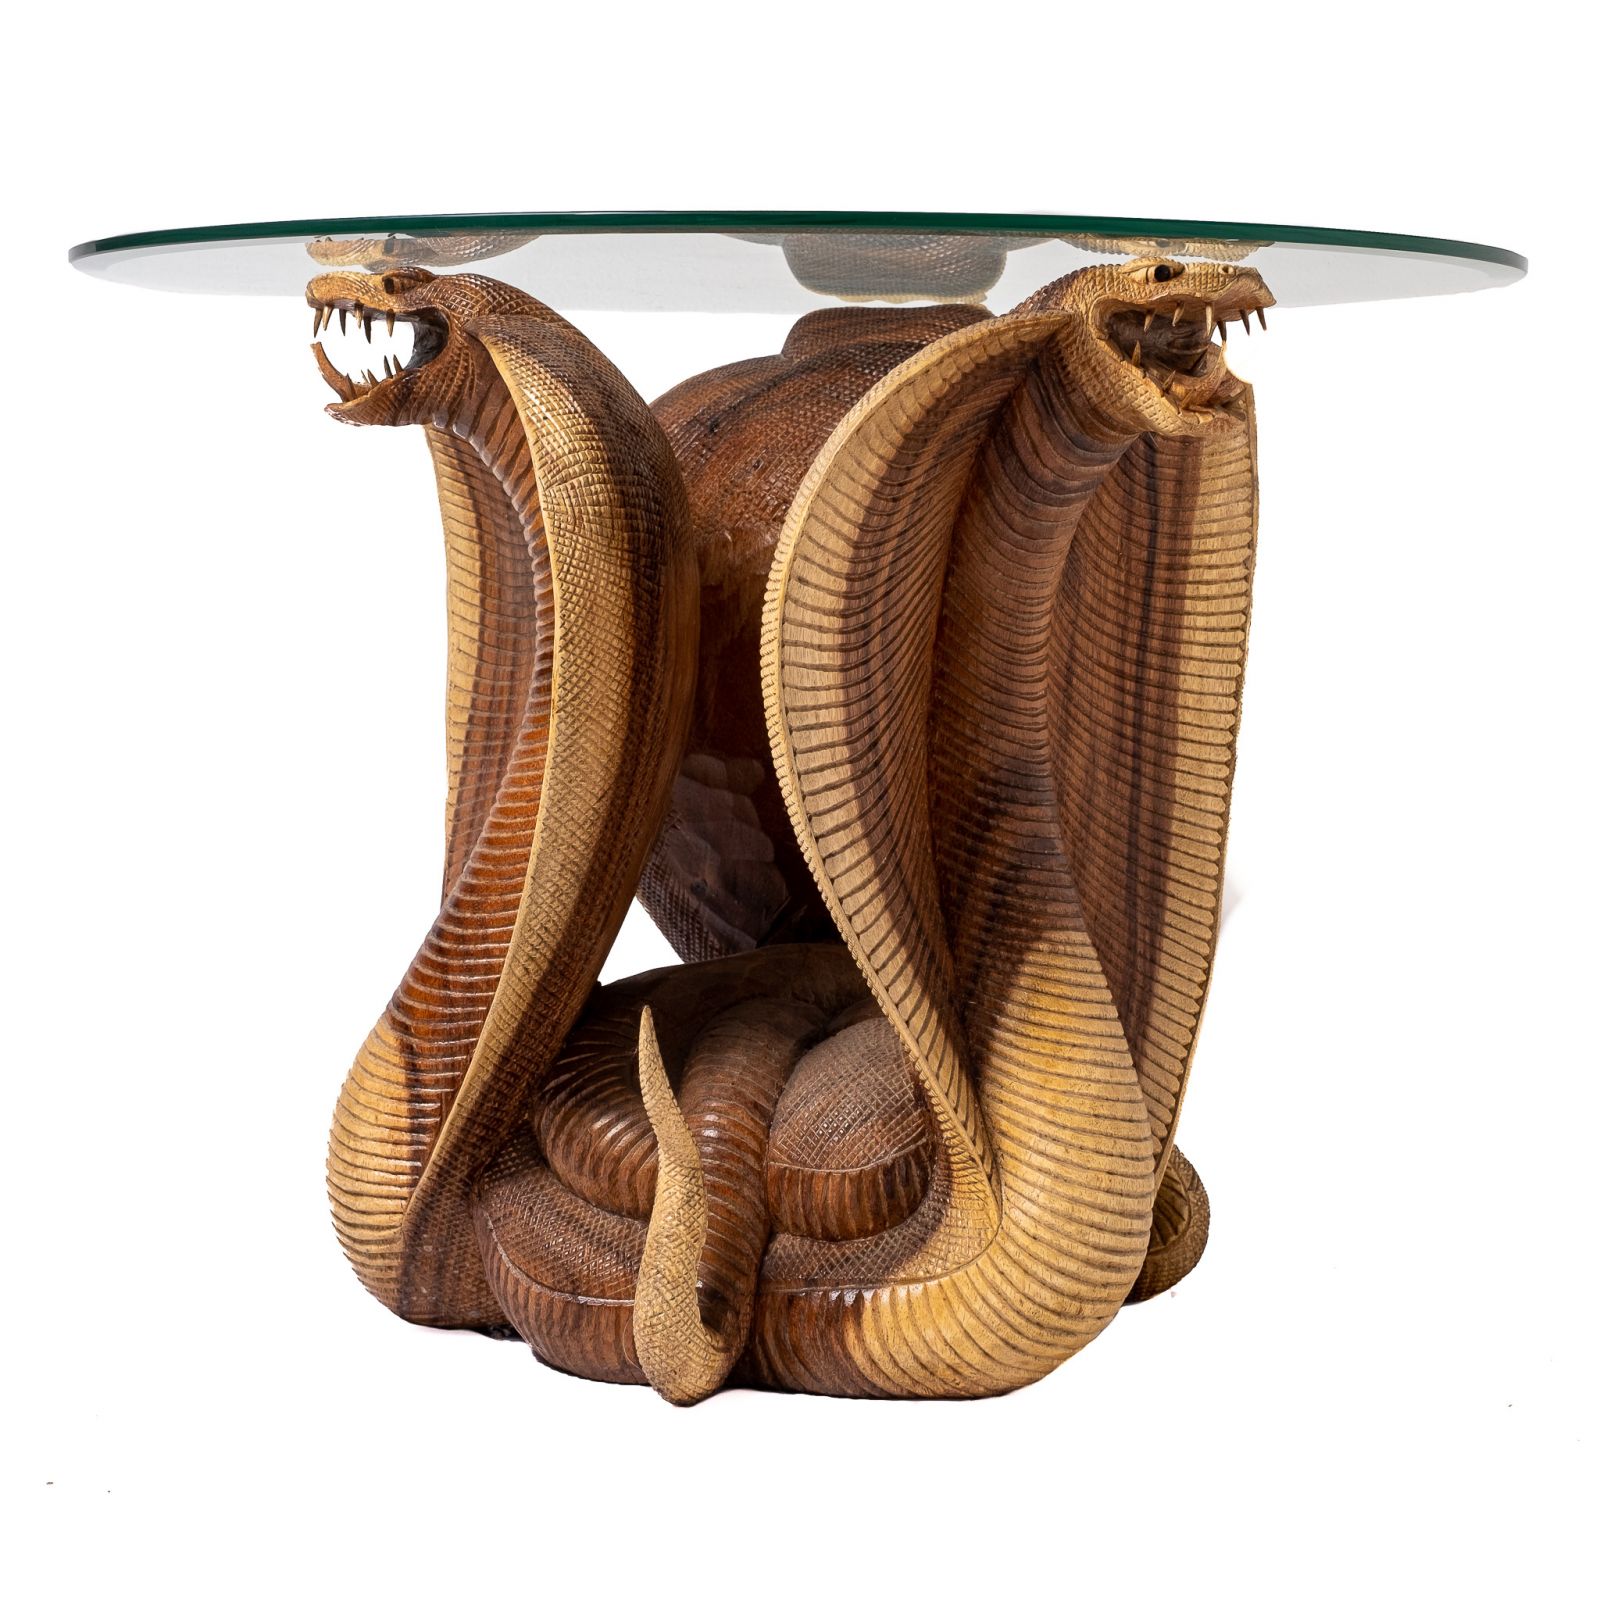 Hand-carved wooden table Cobras Indonesia